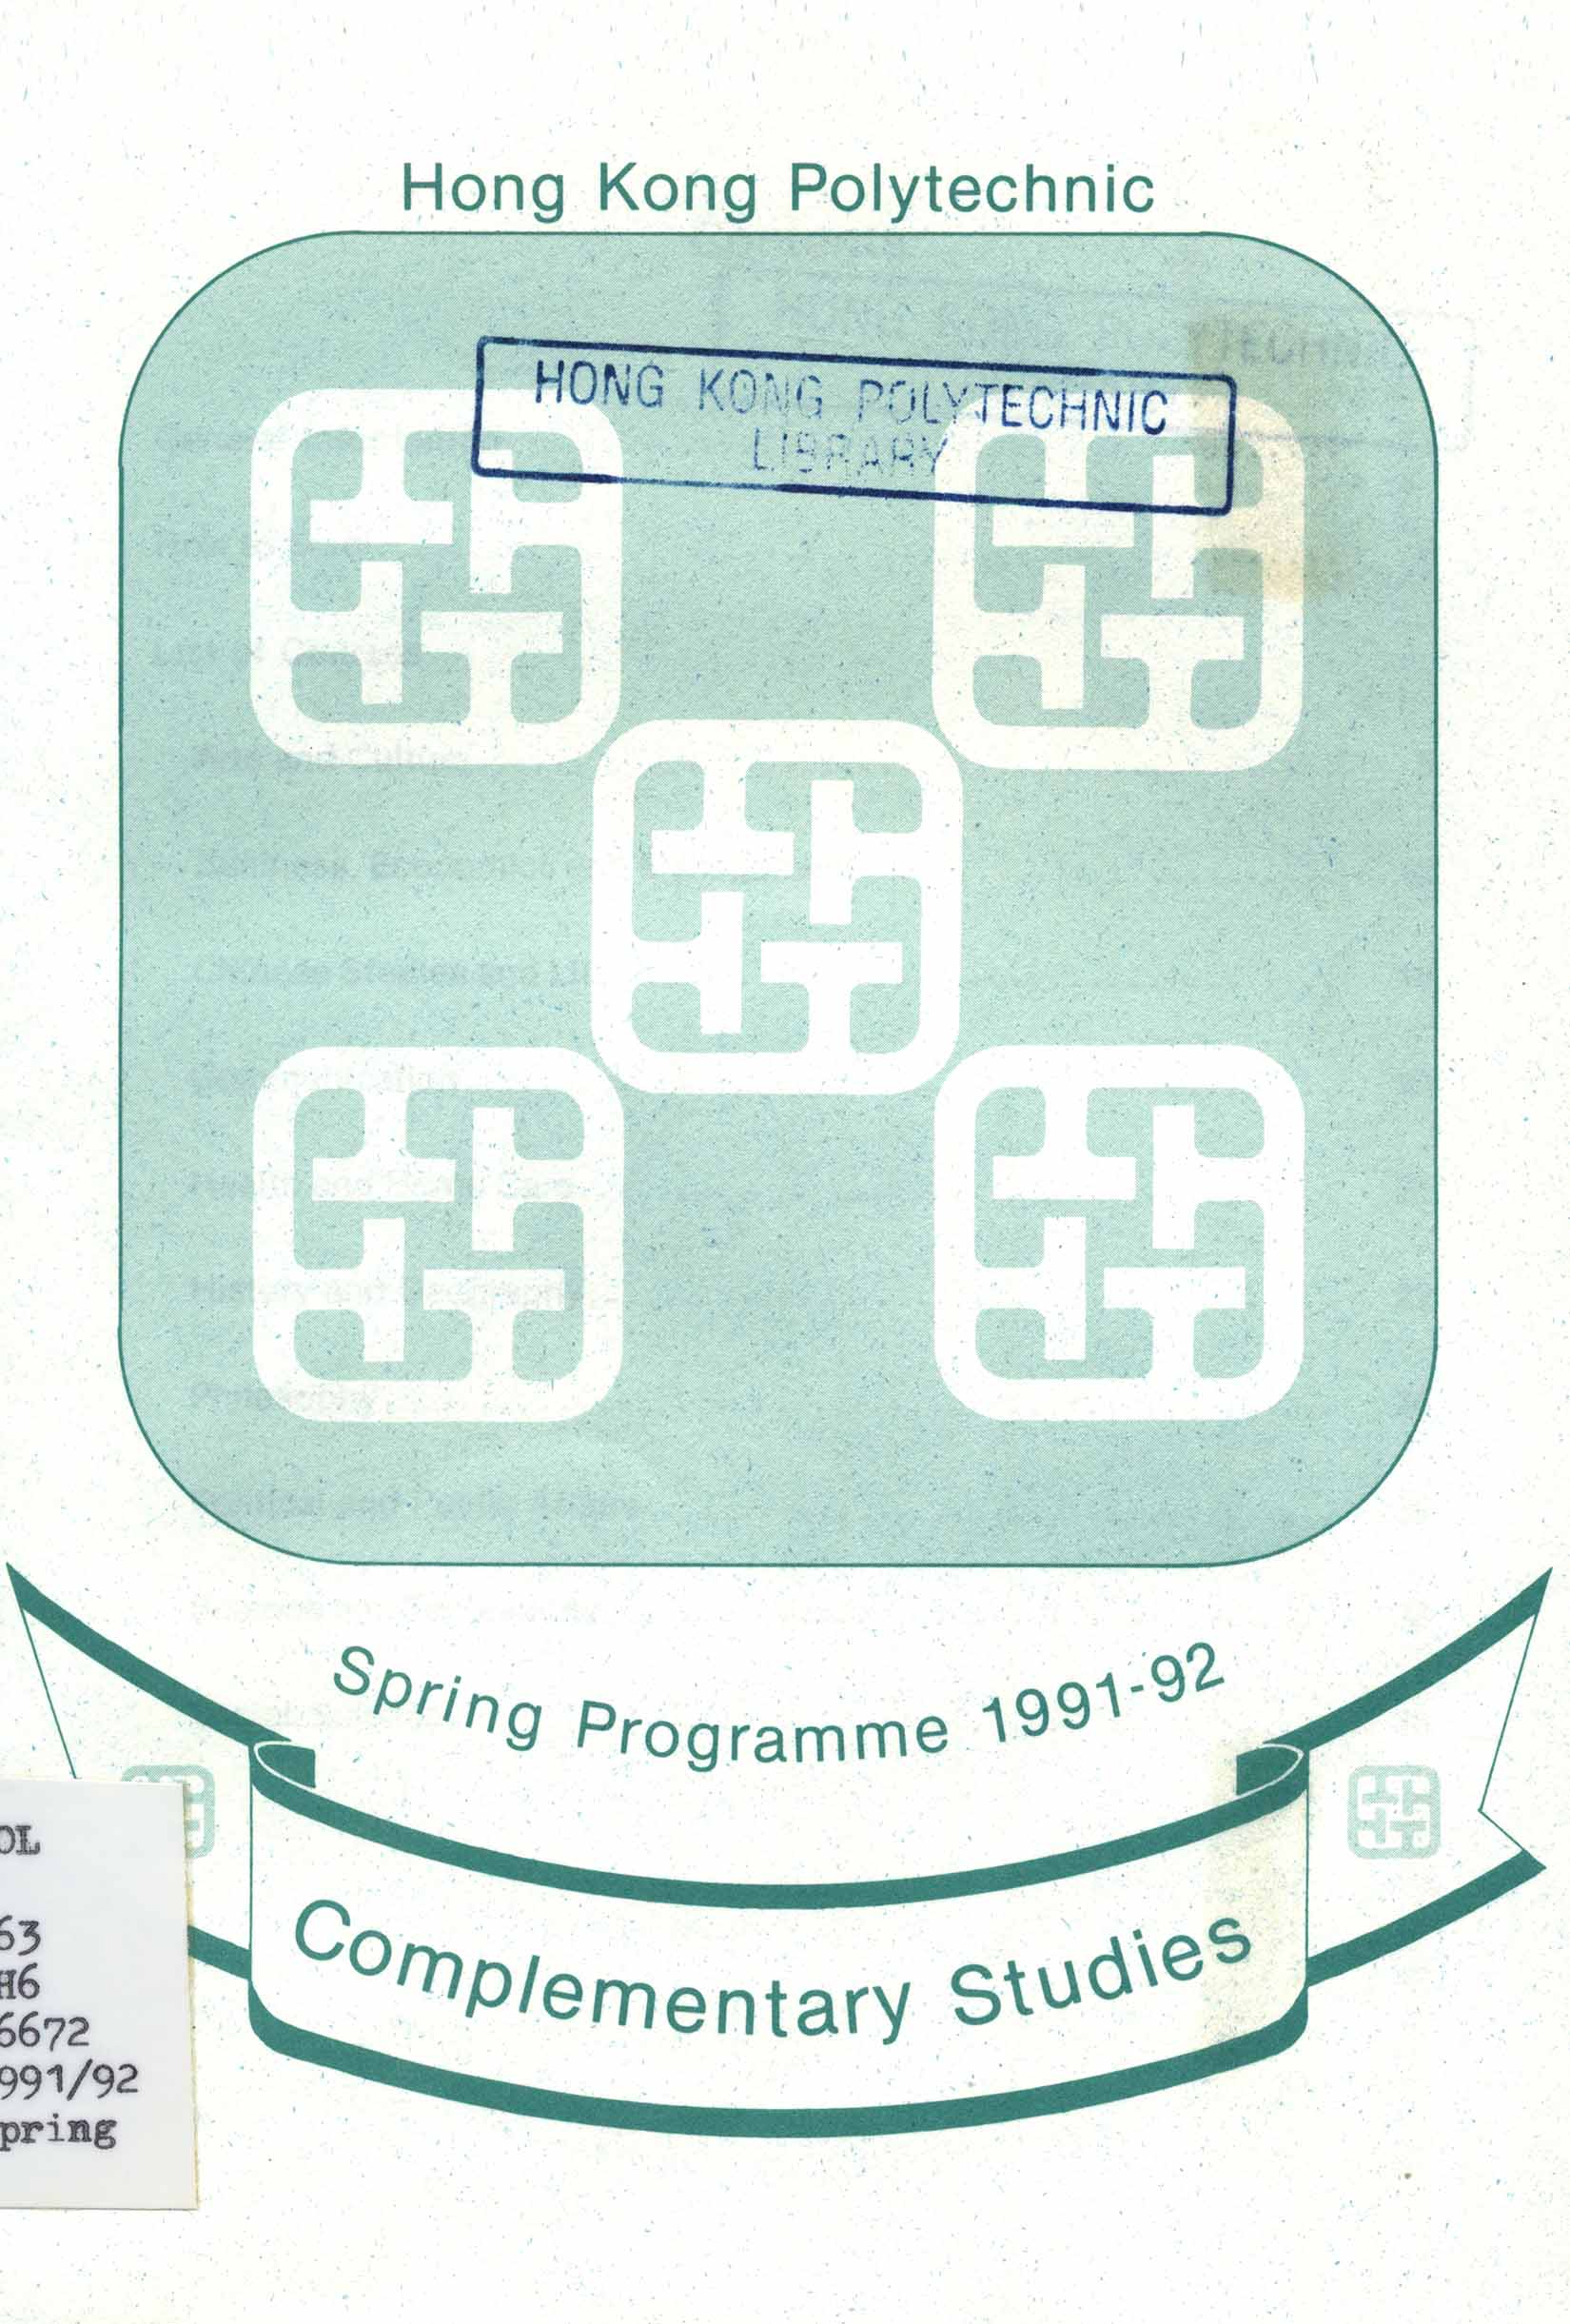 Complementary studies spring programme 1991-92